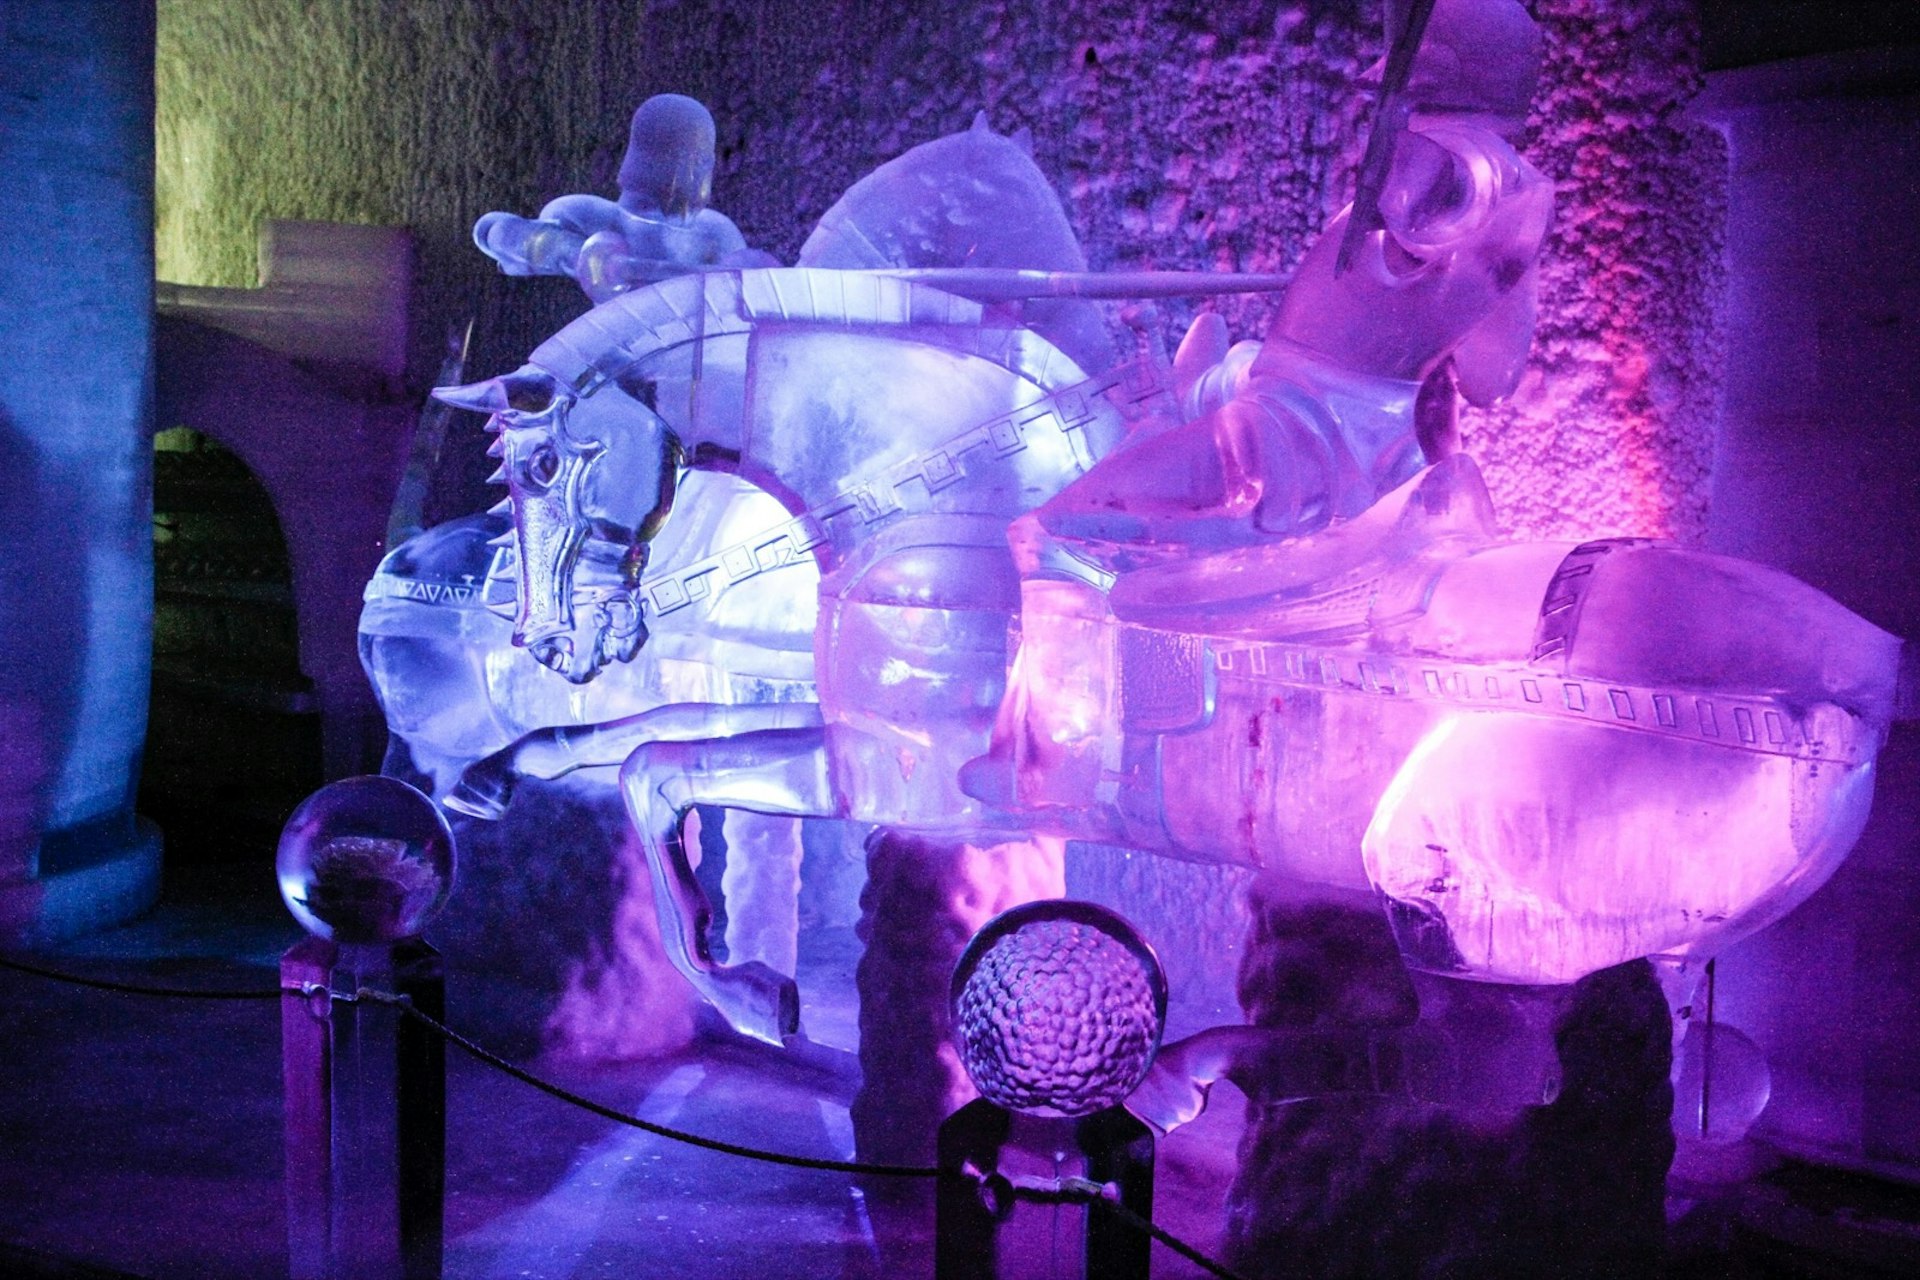 Purple and blue lights illuminate a large ice sculpture of a warrior on a horse in an indoor ice museum at Chena hot springs